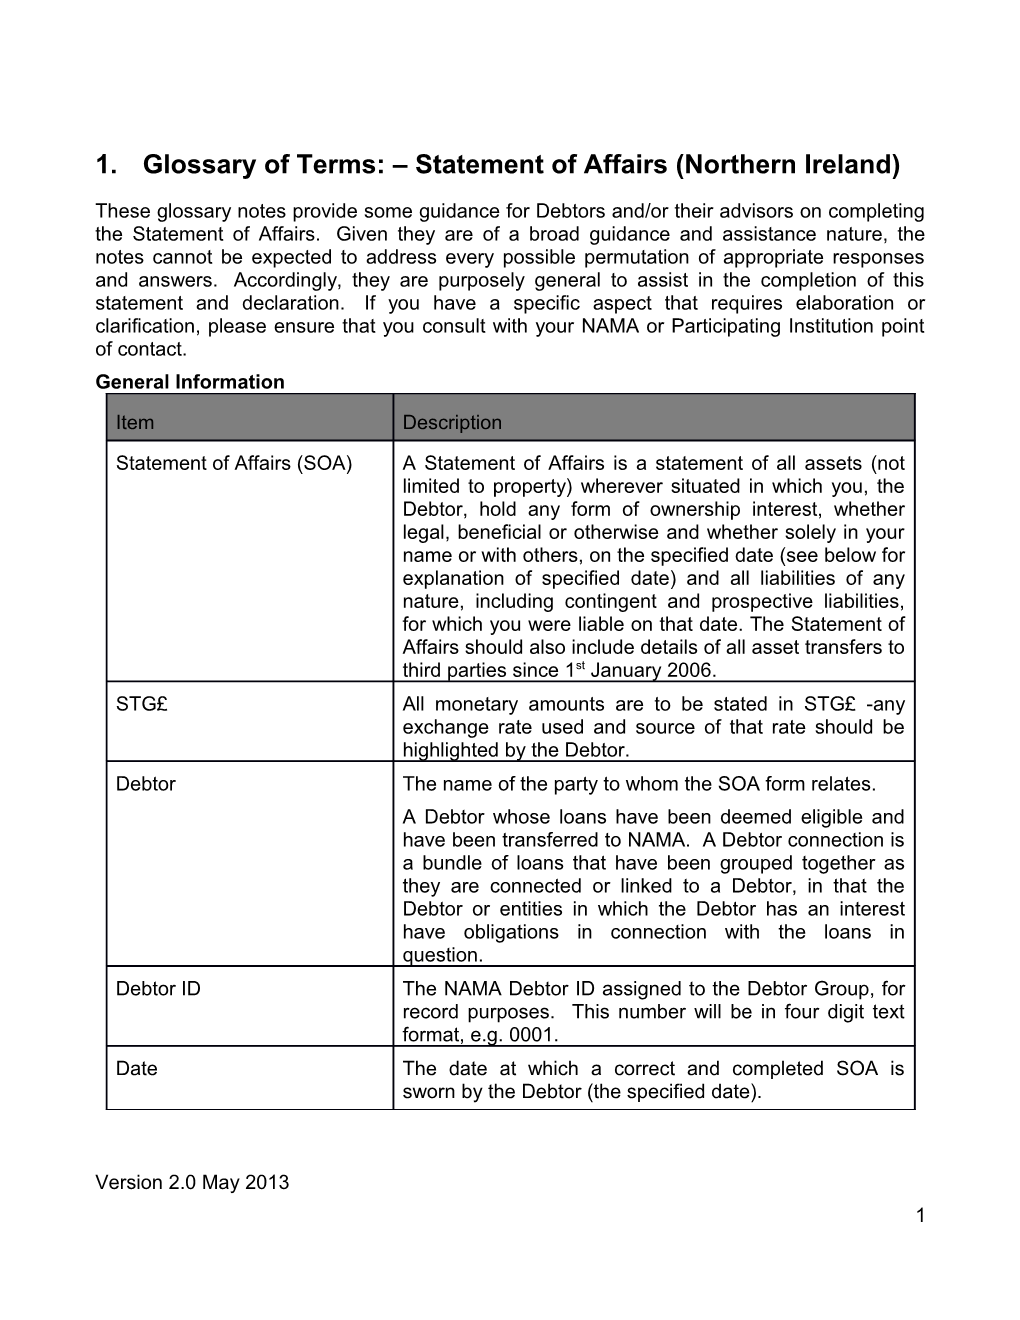 Glossary of Terms: Statement of Affairs (Northern Ireland)